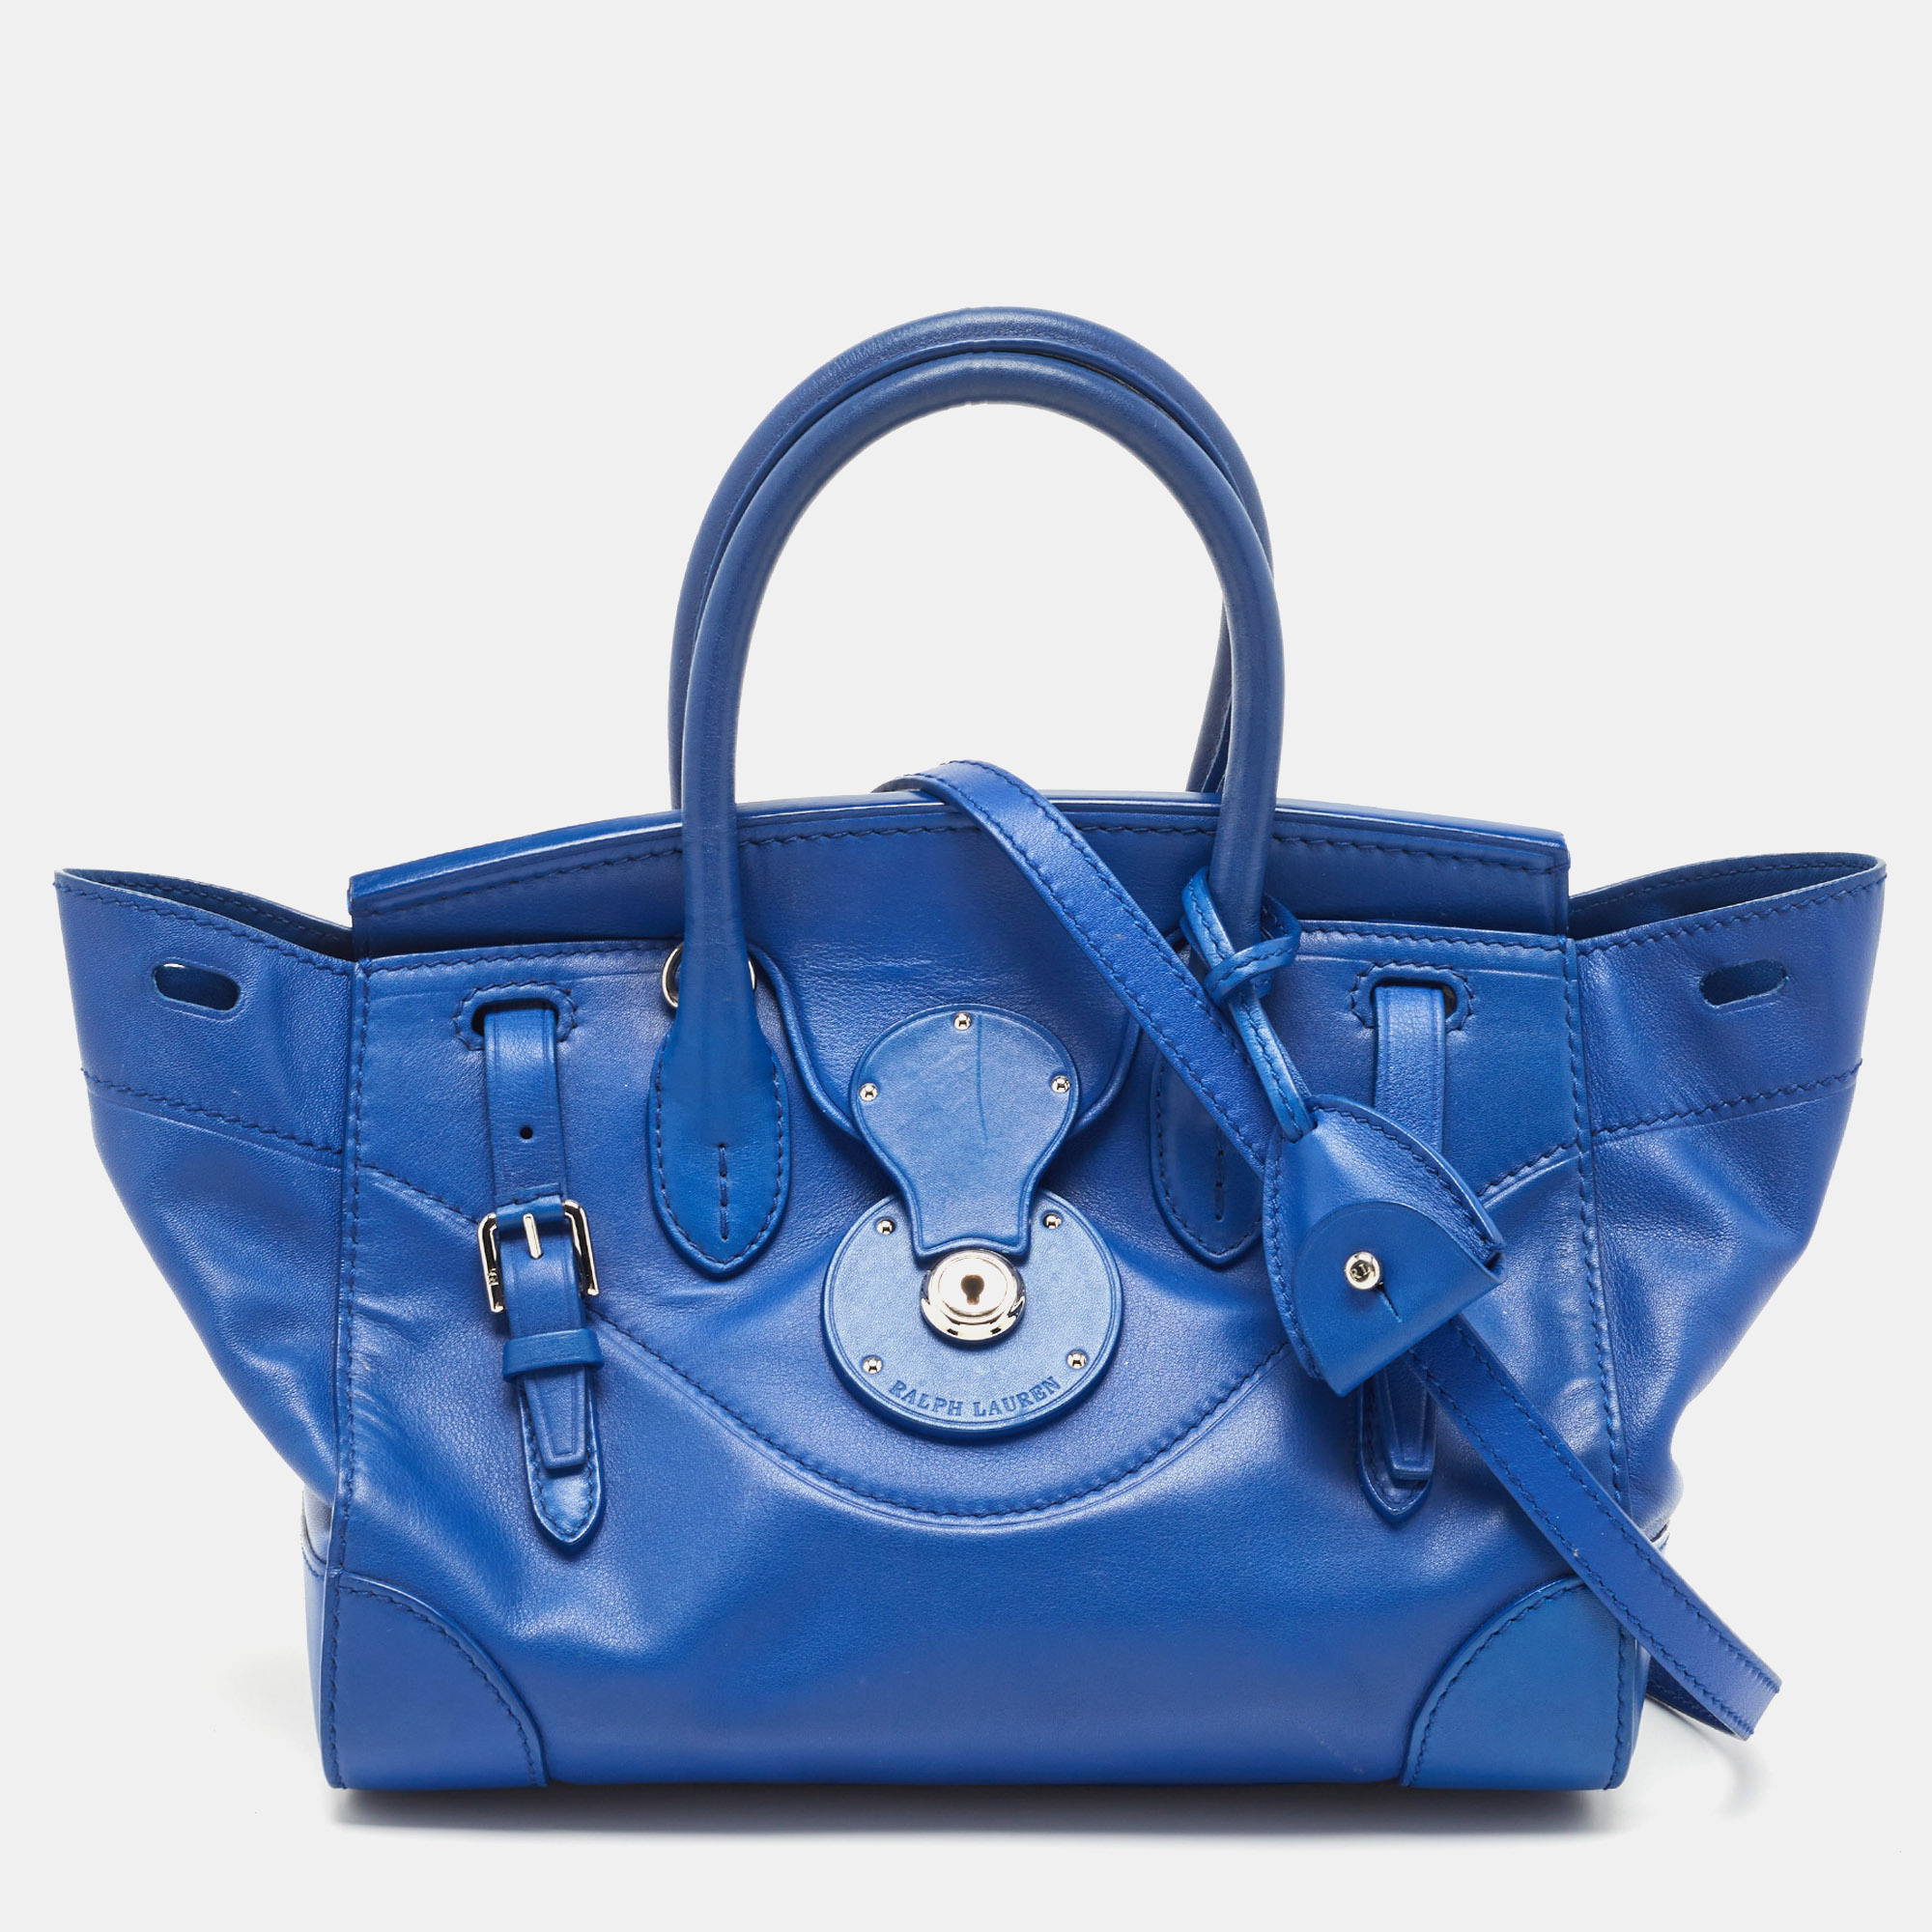 Ralph Lauren Blue Leather Soft Ricky Tote